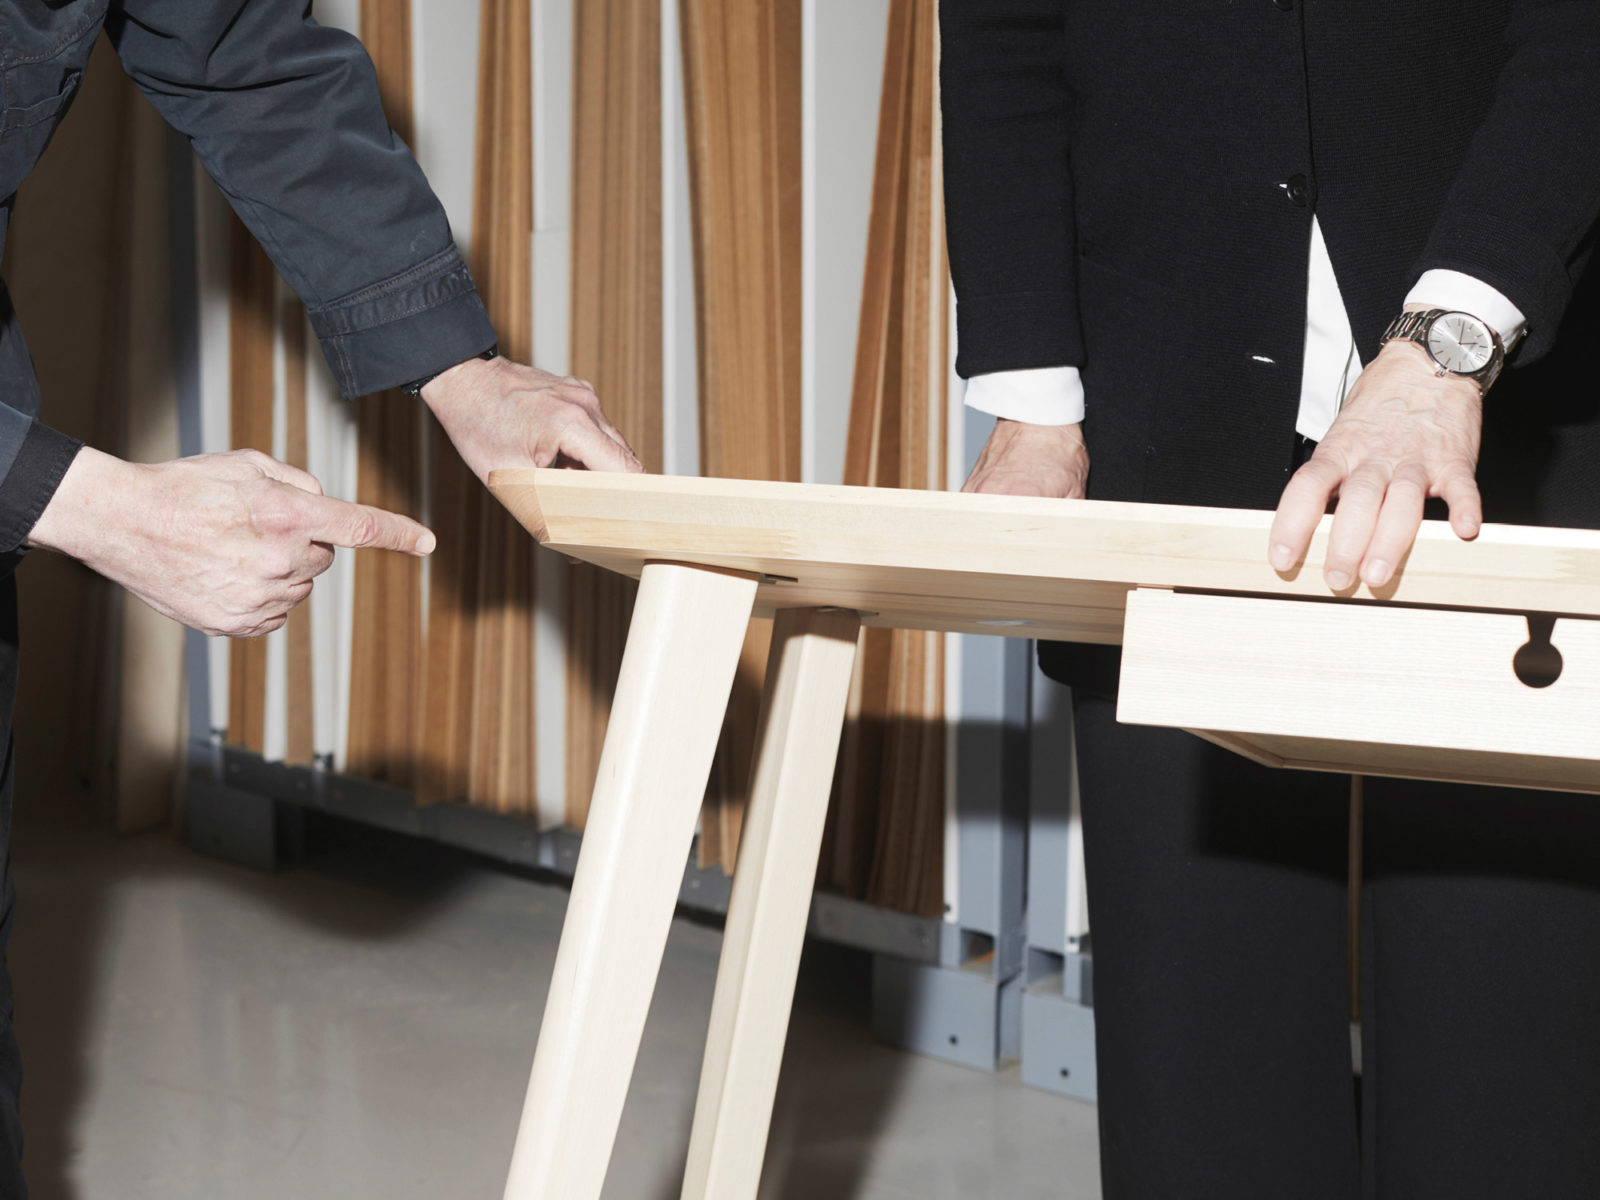 Close-up of two people holding a table, one pointing towards the area where a table leg is fastened on table top.